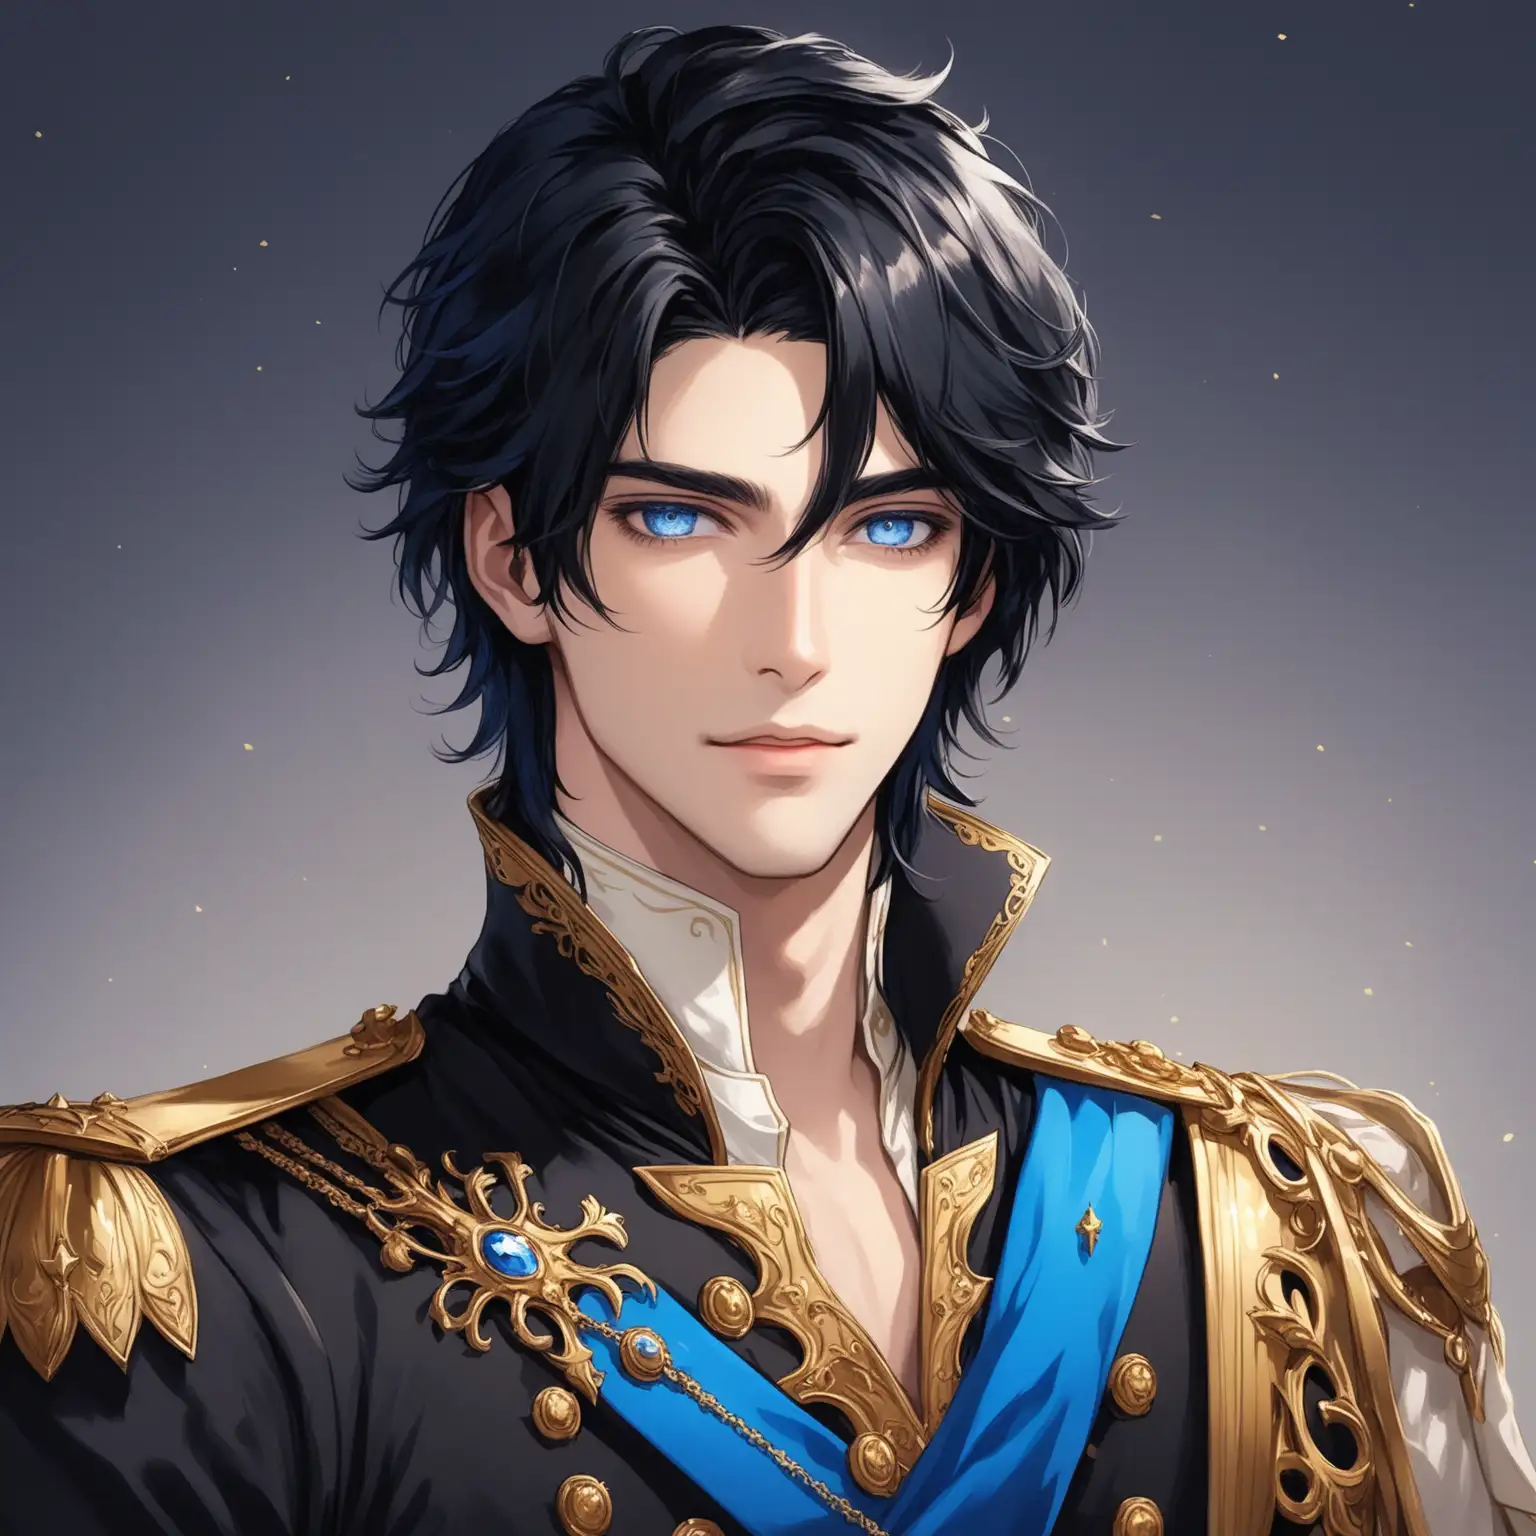 Handsome Prince with Black Hair and Blue Eyes in Regal Attire